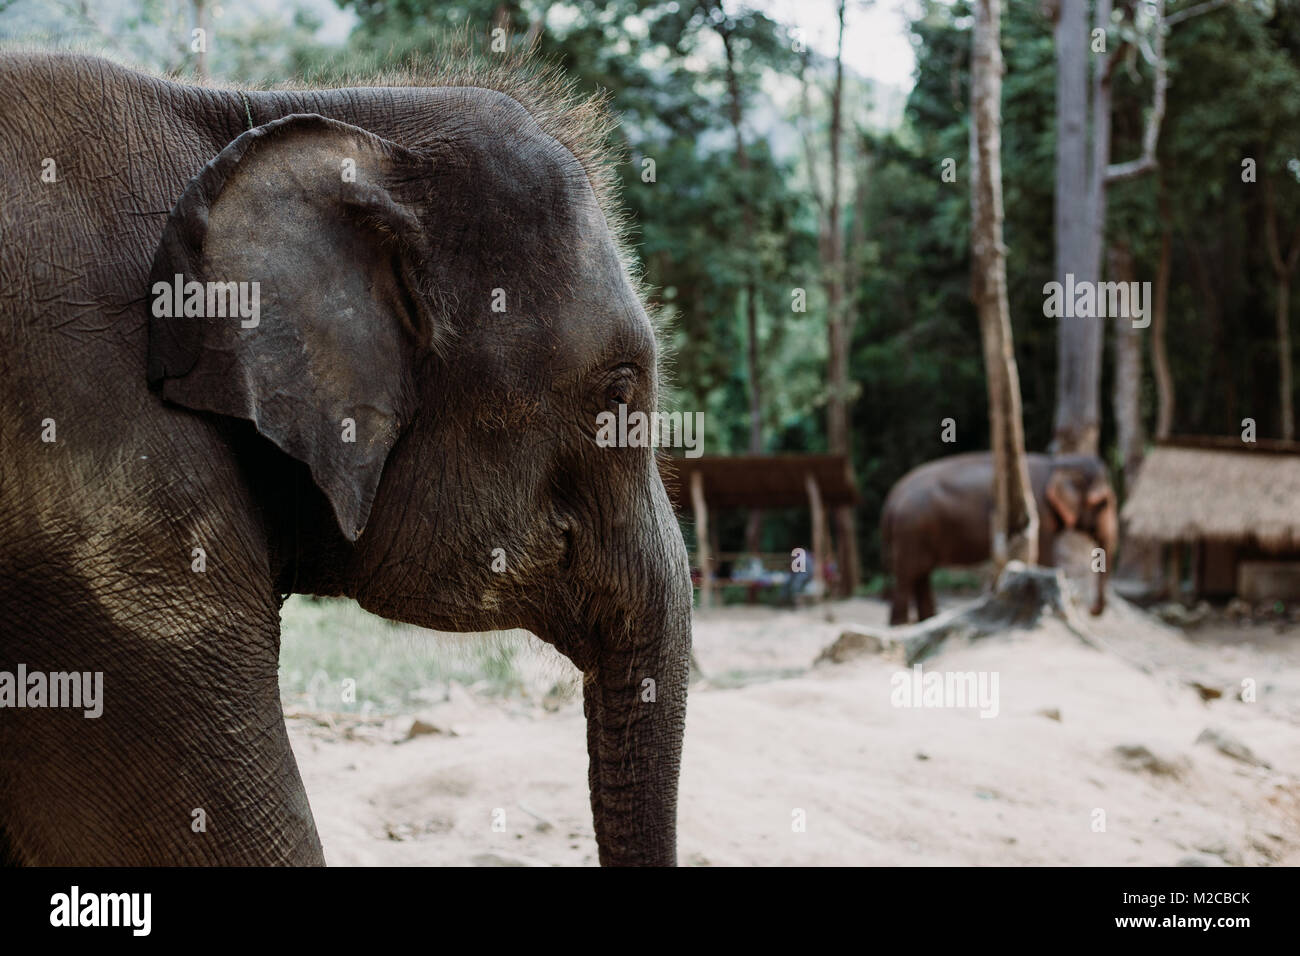 Profile view of a young elephant in Chiang Mai, Thailand Stock Photo